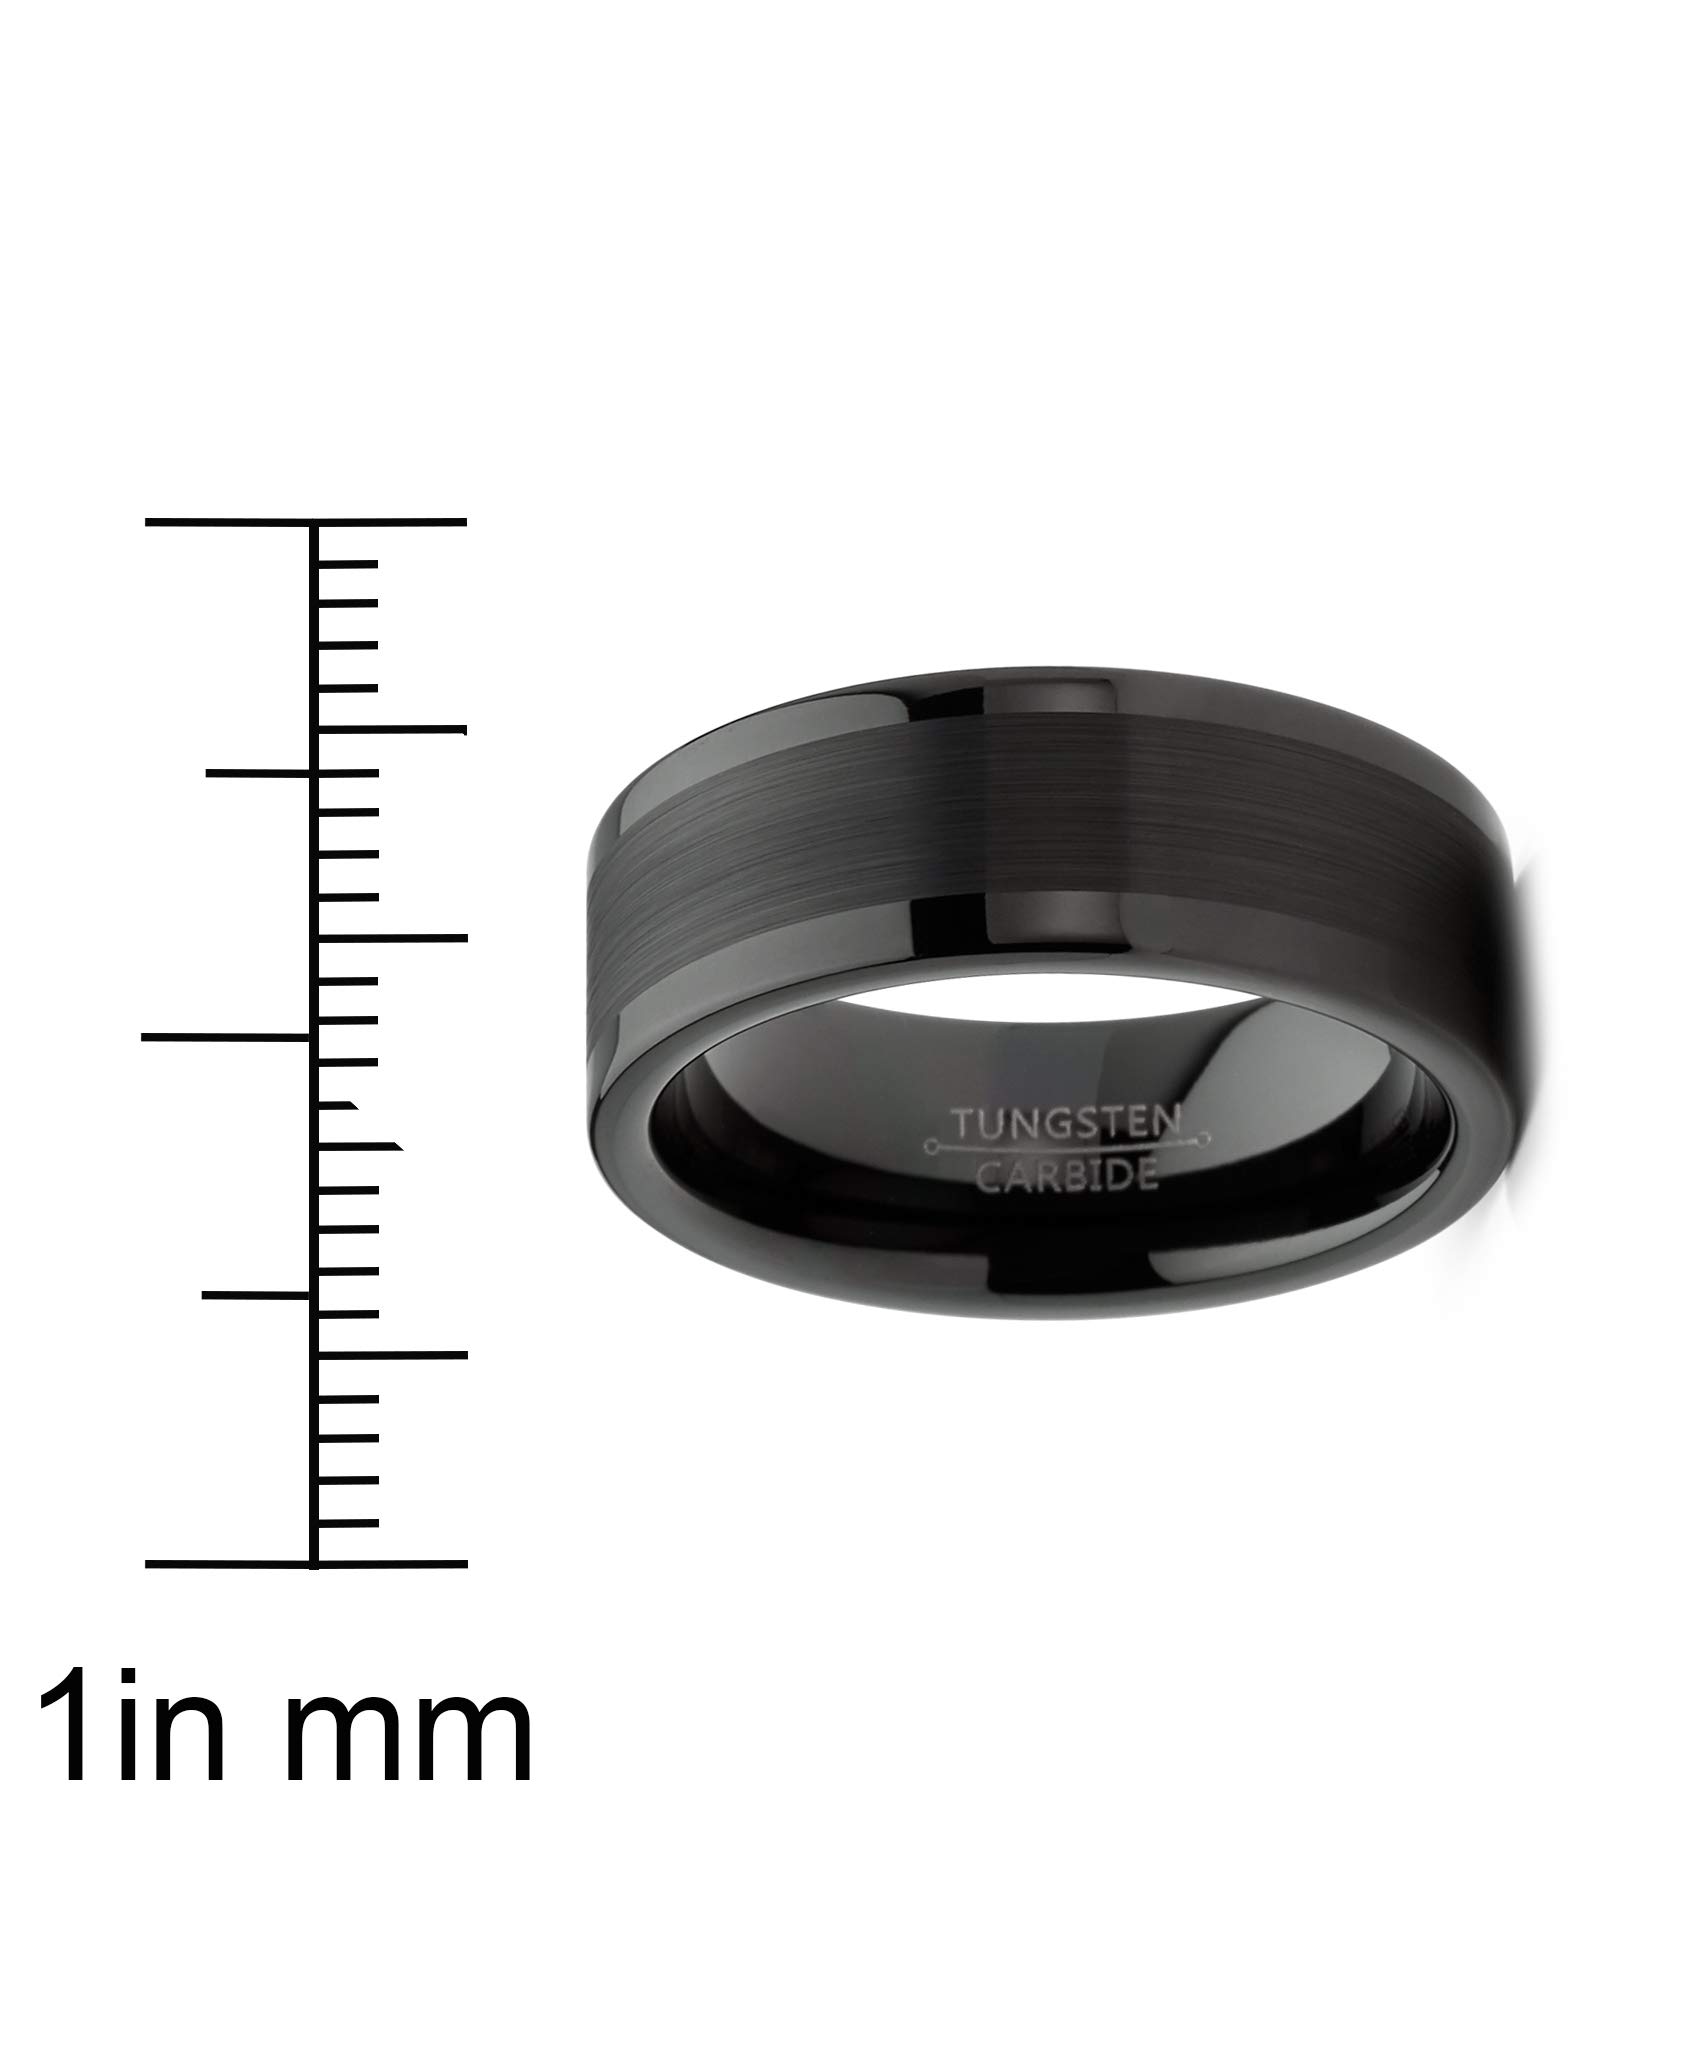 Metal Masters Co. Mens Tungsten Ring Black Wedding Band Brushed Comfort-fit 8MM 7-15